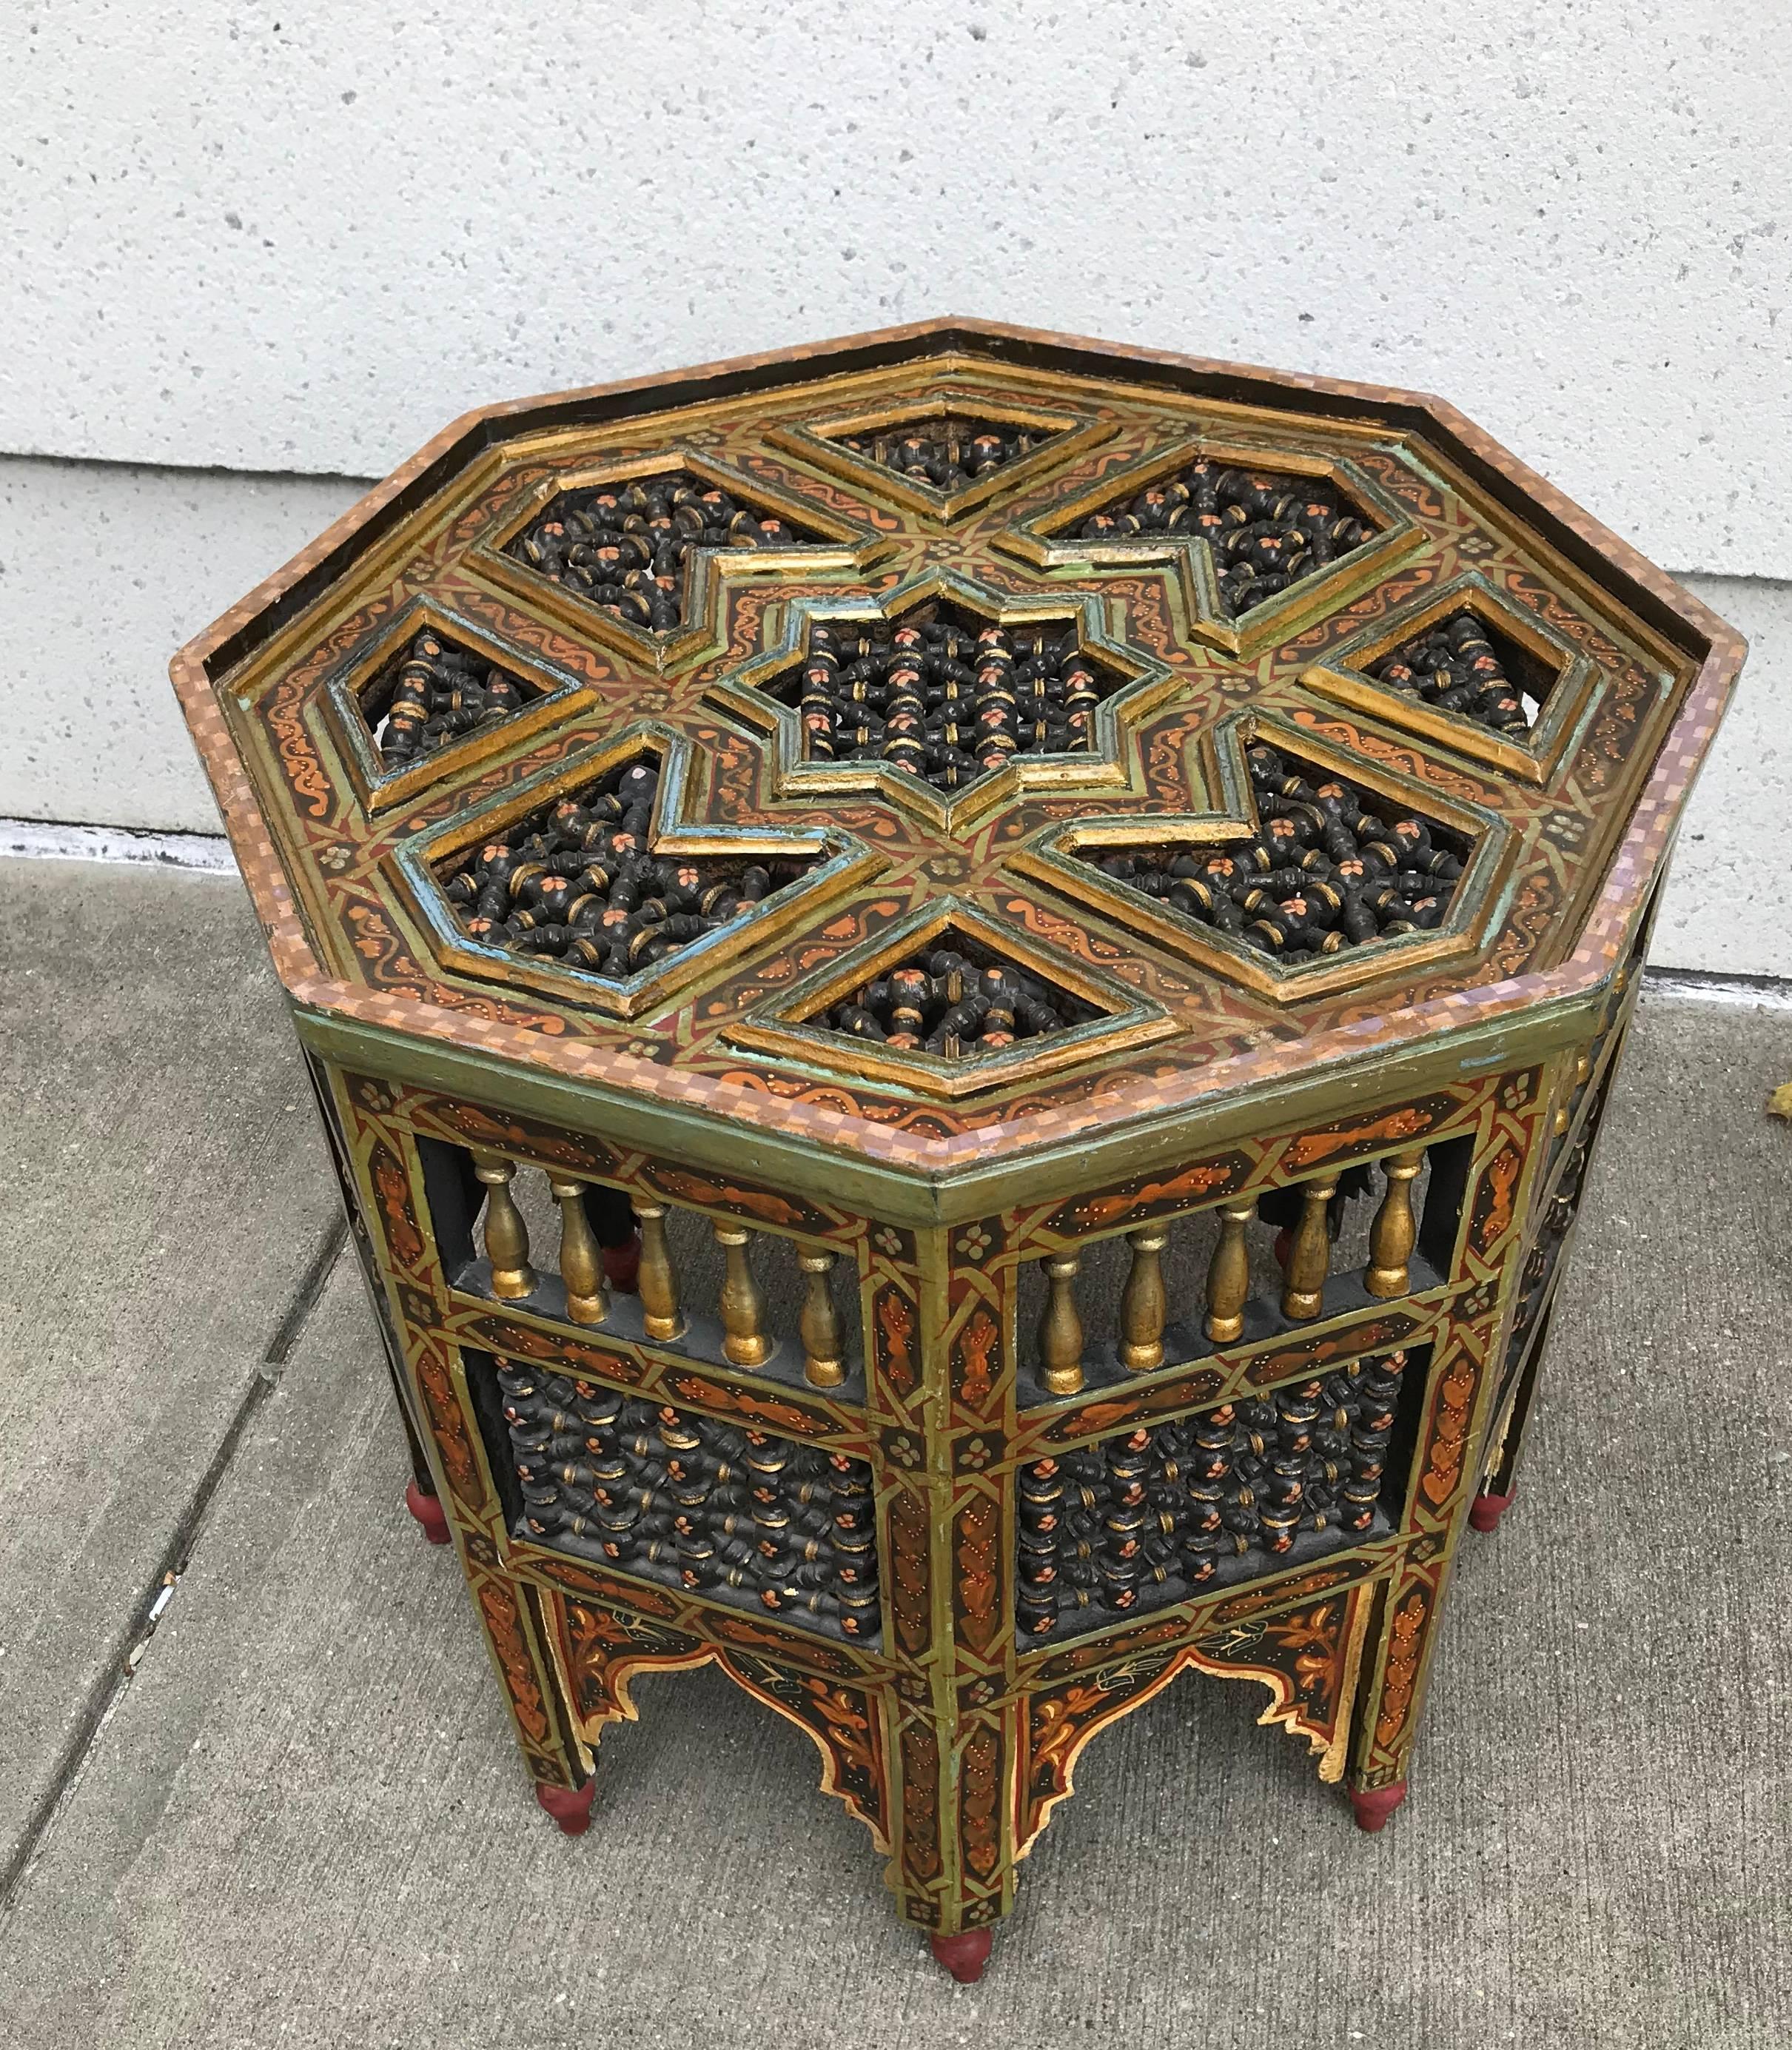 Best quality Moroccan side table with intricate carving throughout and original paint. This one is the real deal. With a glass top. Larger than typical with this type of table. Great side, end or drinks table with a lot of character.
Measure: 24